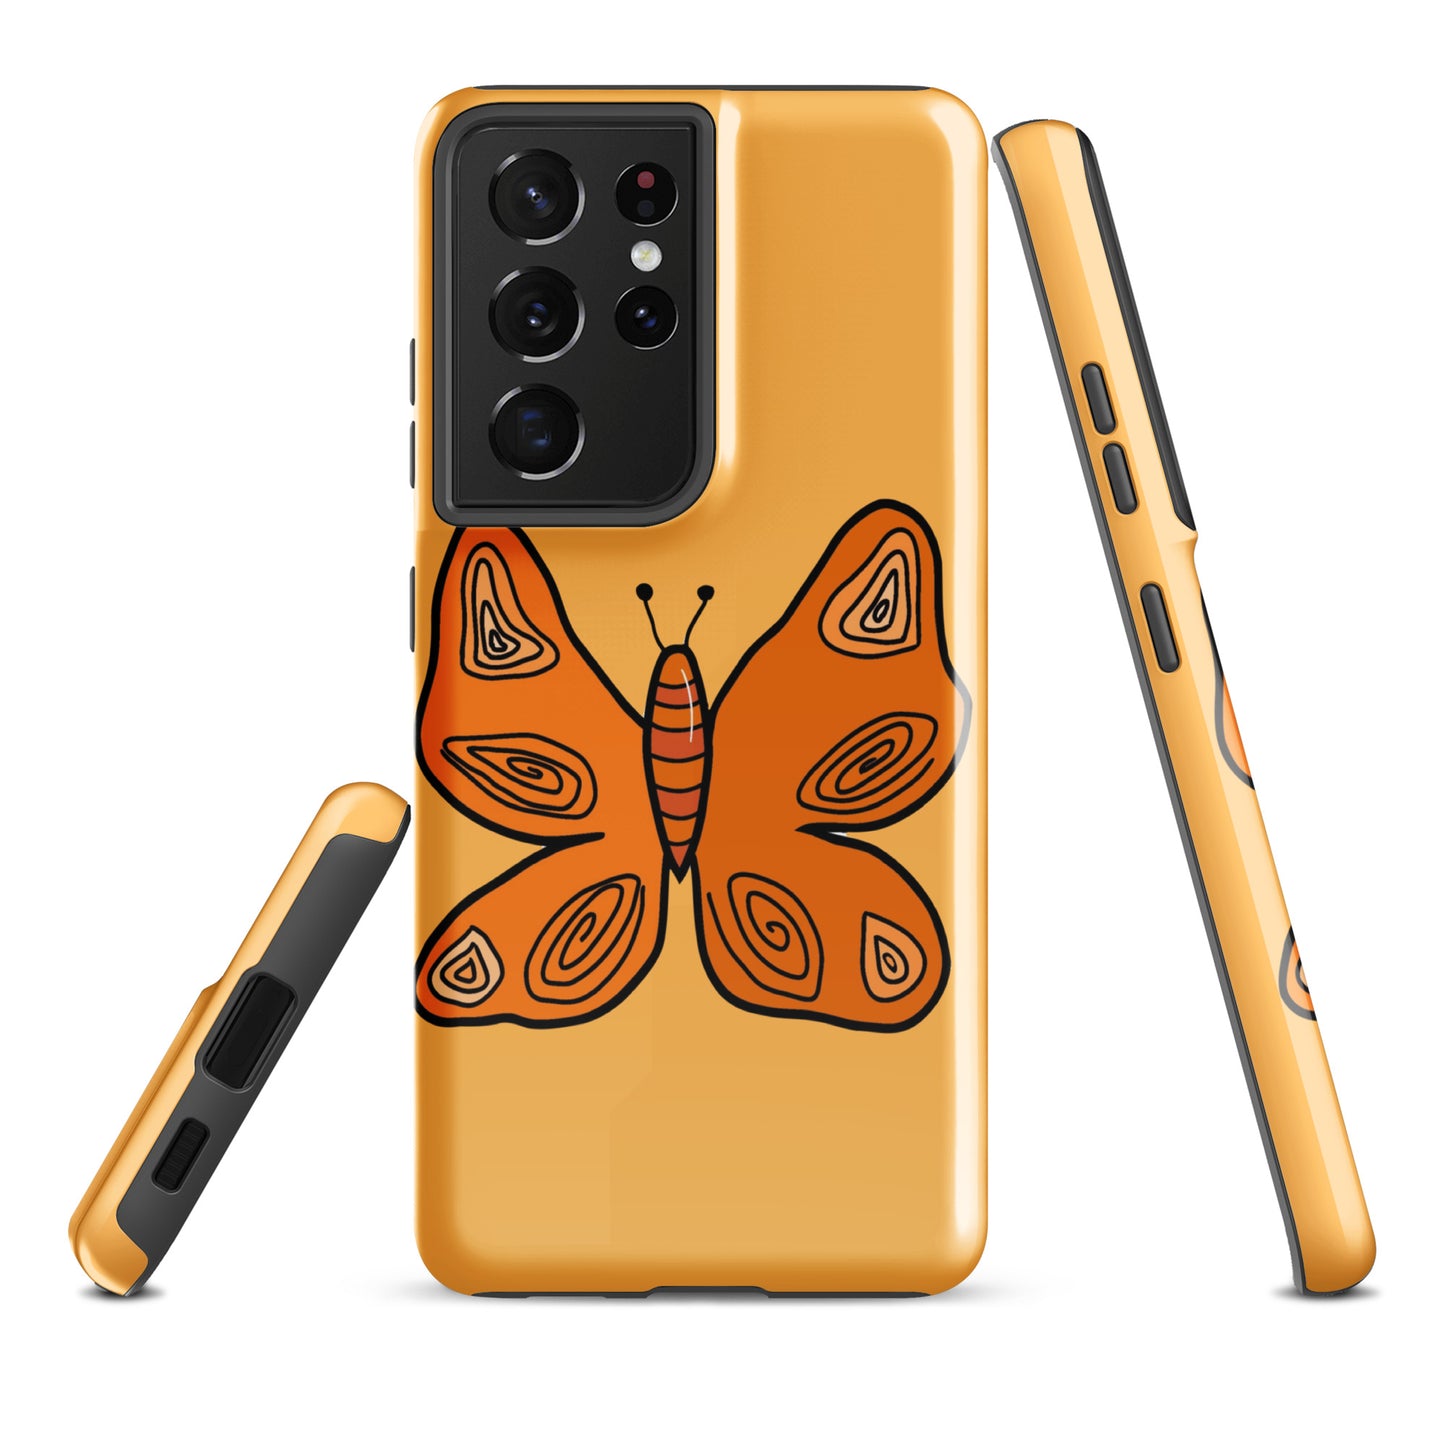 An Orange Butterfly Case for the Samsung Galaxy S21 Ultra